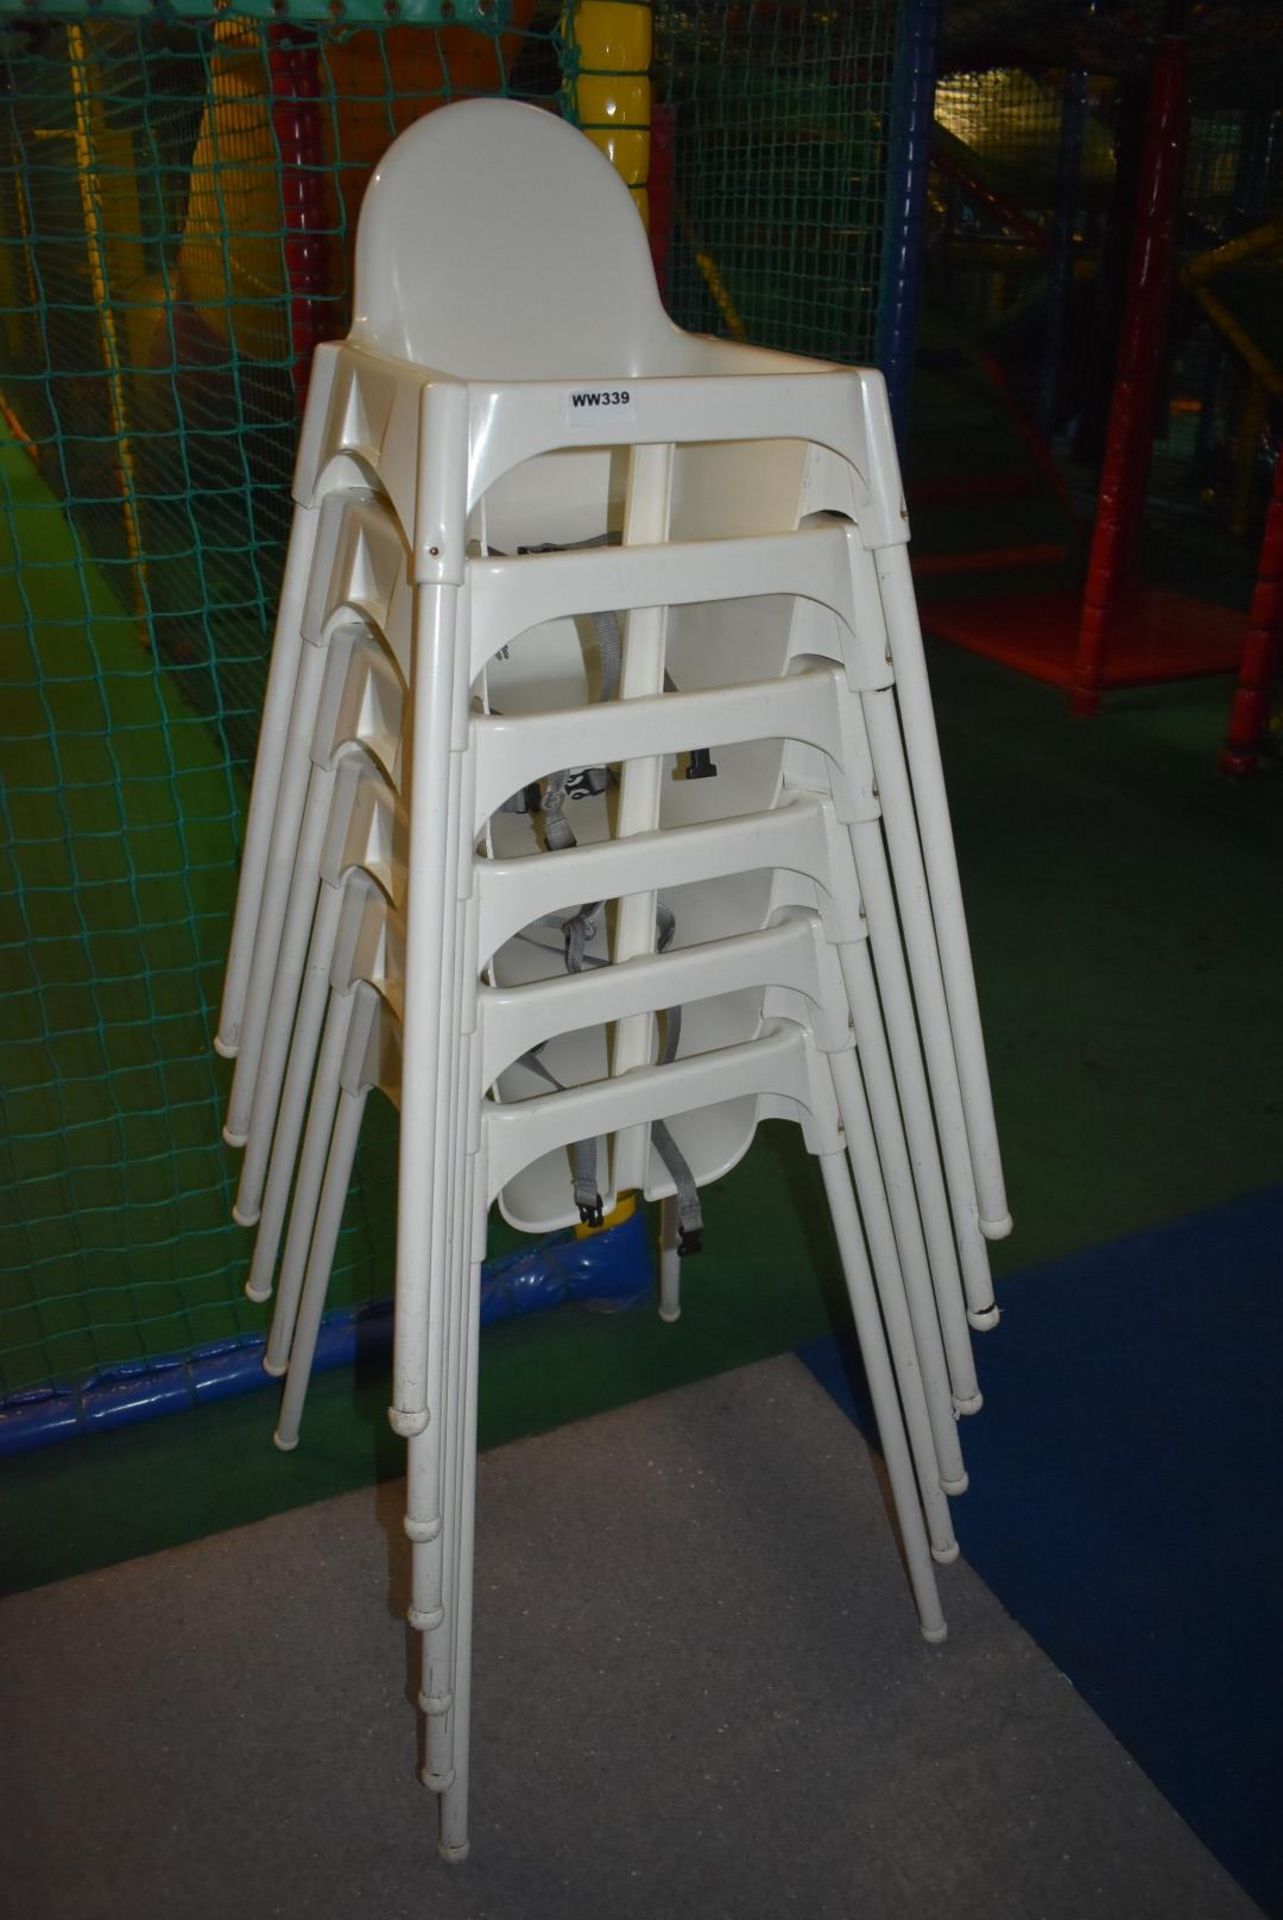 6 x White Plastic Children's High Chairs - Ref WW339 - CL520 - Location: London W10 More pictures,